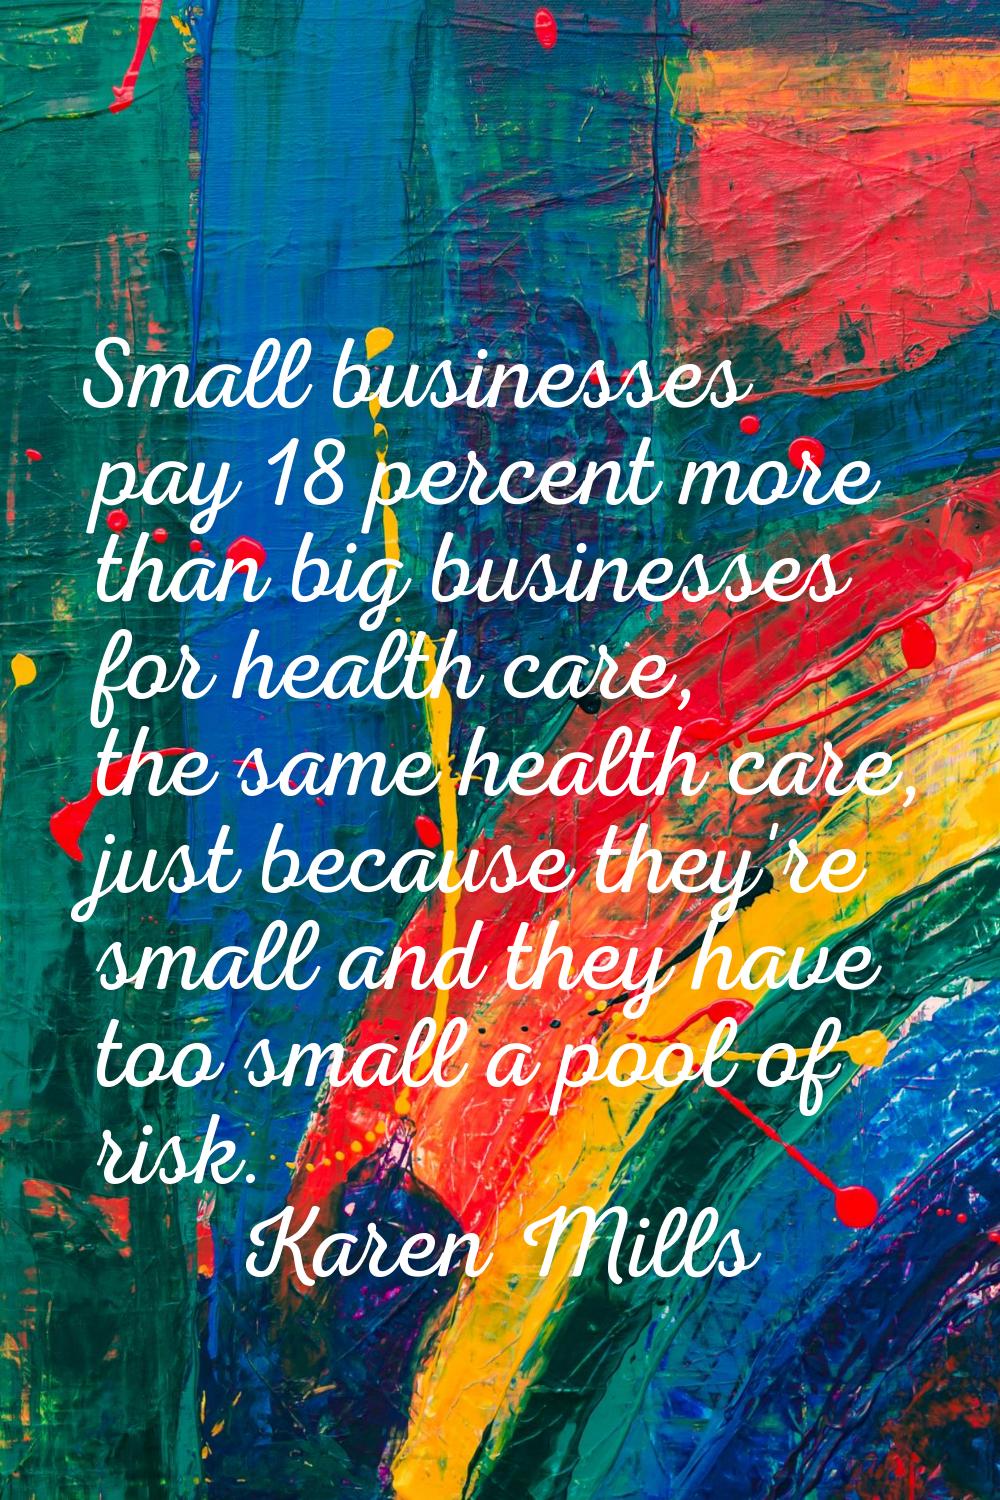 Small businesses pay 18 percent more than big businesses for health care, the same health care, jus